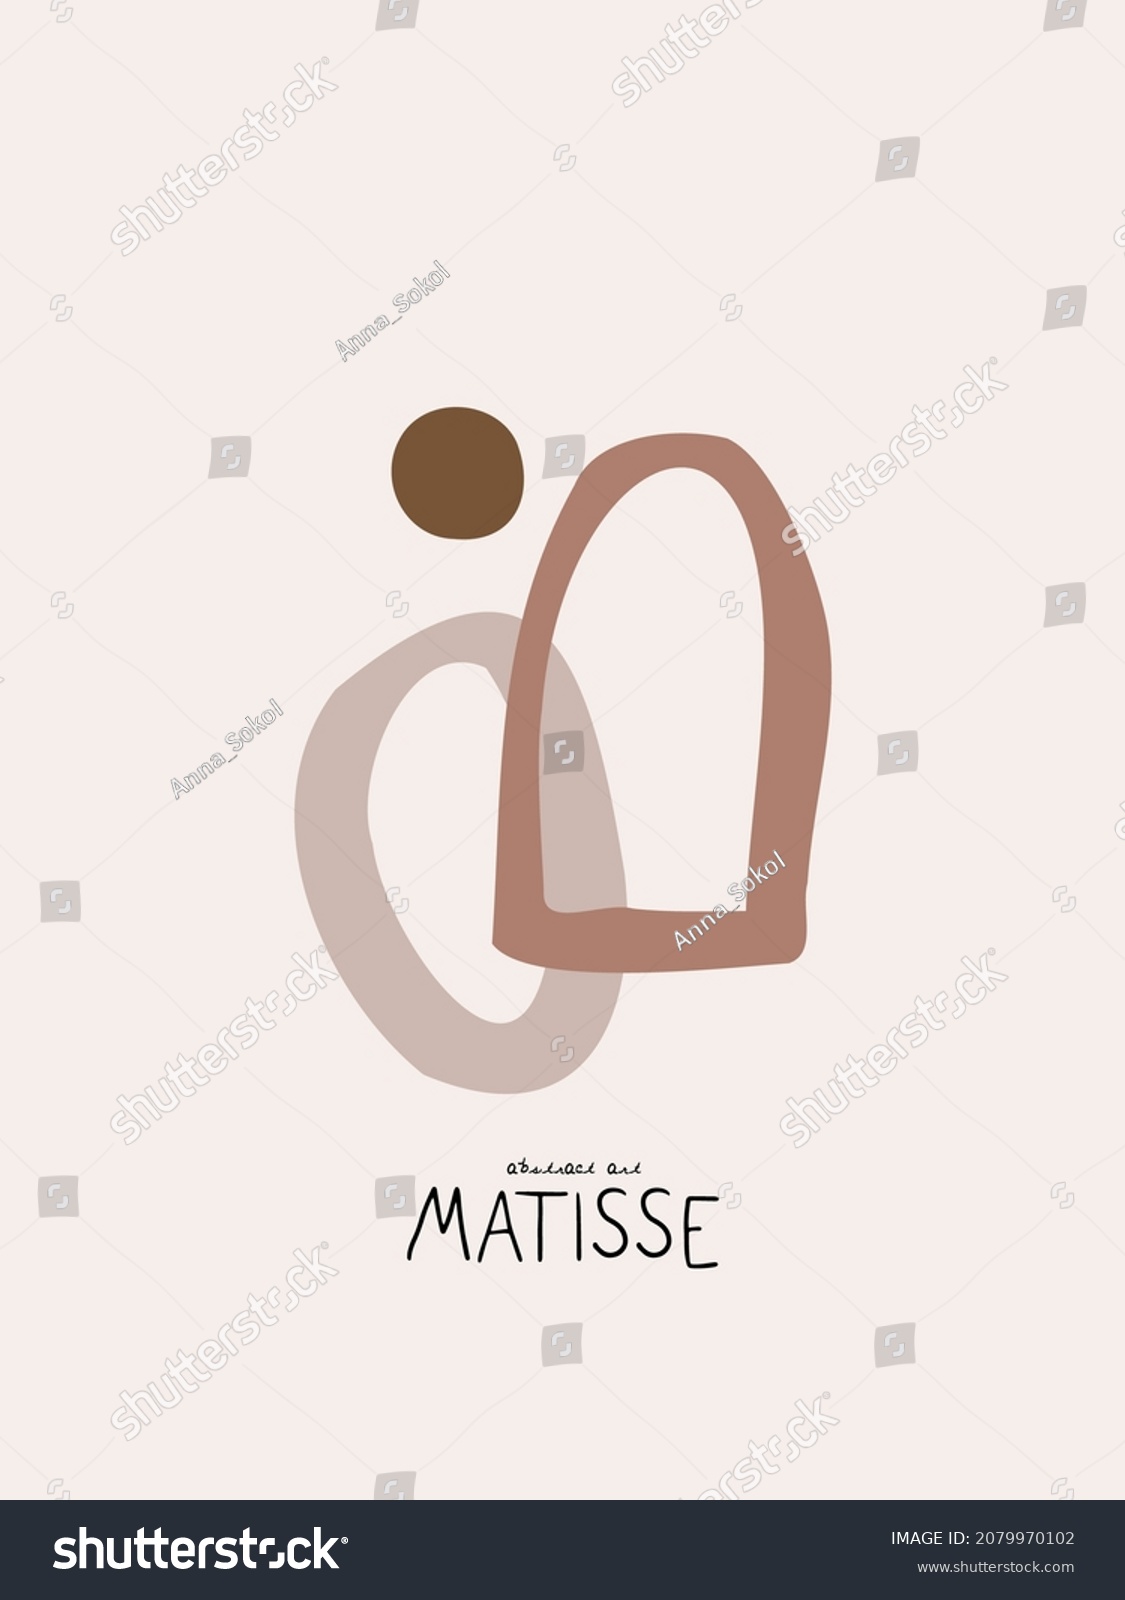 SVG of Modern abstract shapes art. Trendy organic forms and line art drawing. Chic boho style prints. Botanicals. Neutral pastel, blush pink, dusty pink, beige colors. Logo, branding, web etc svg